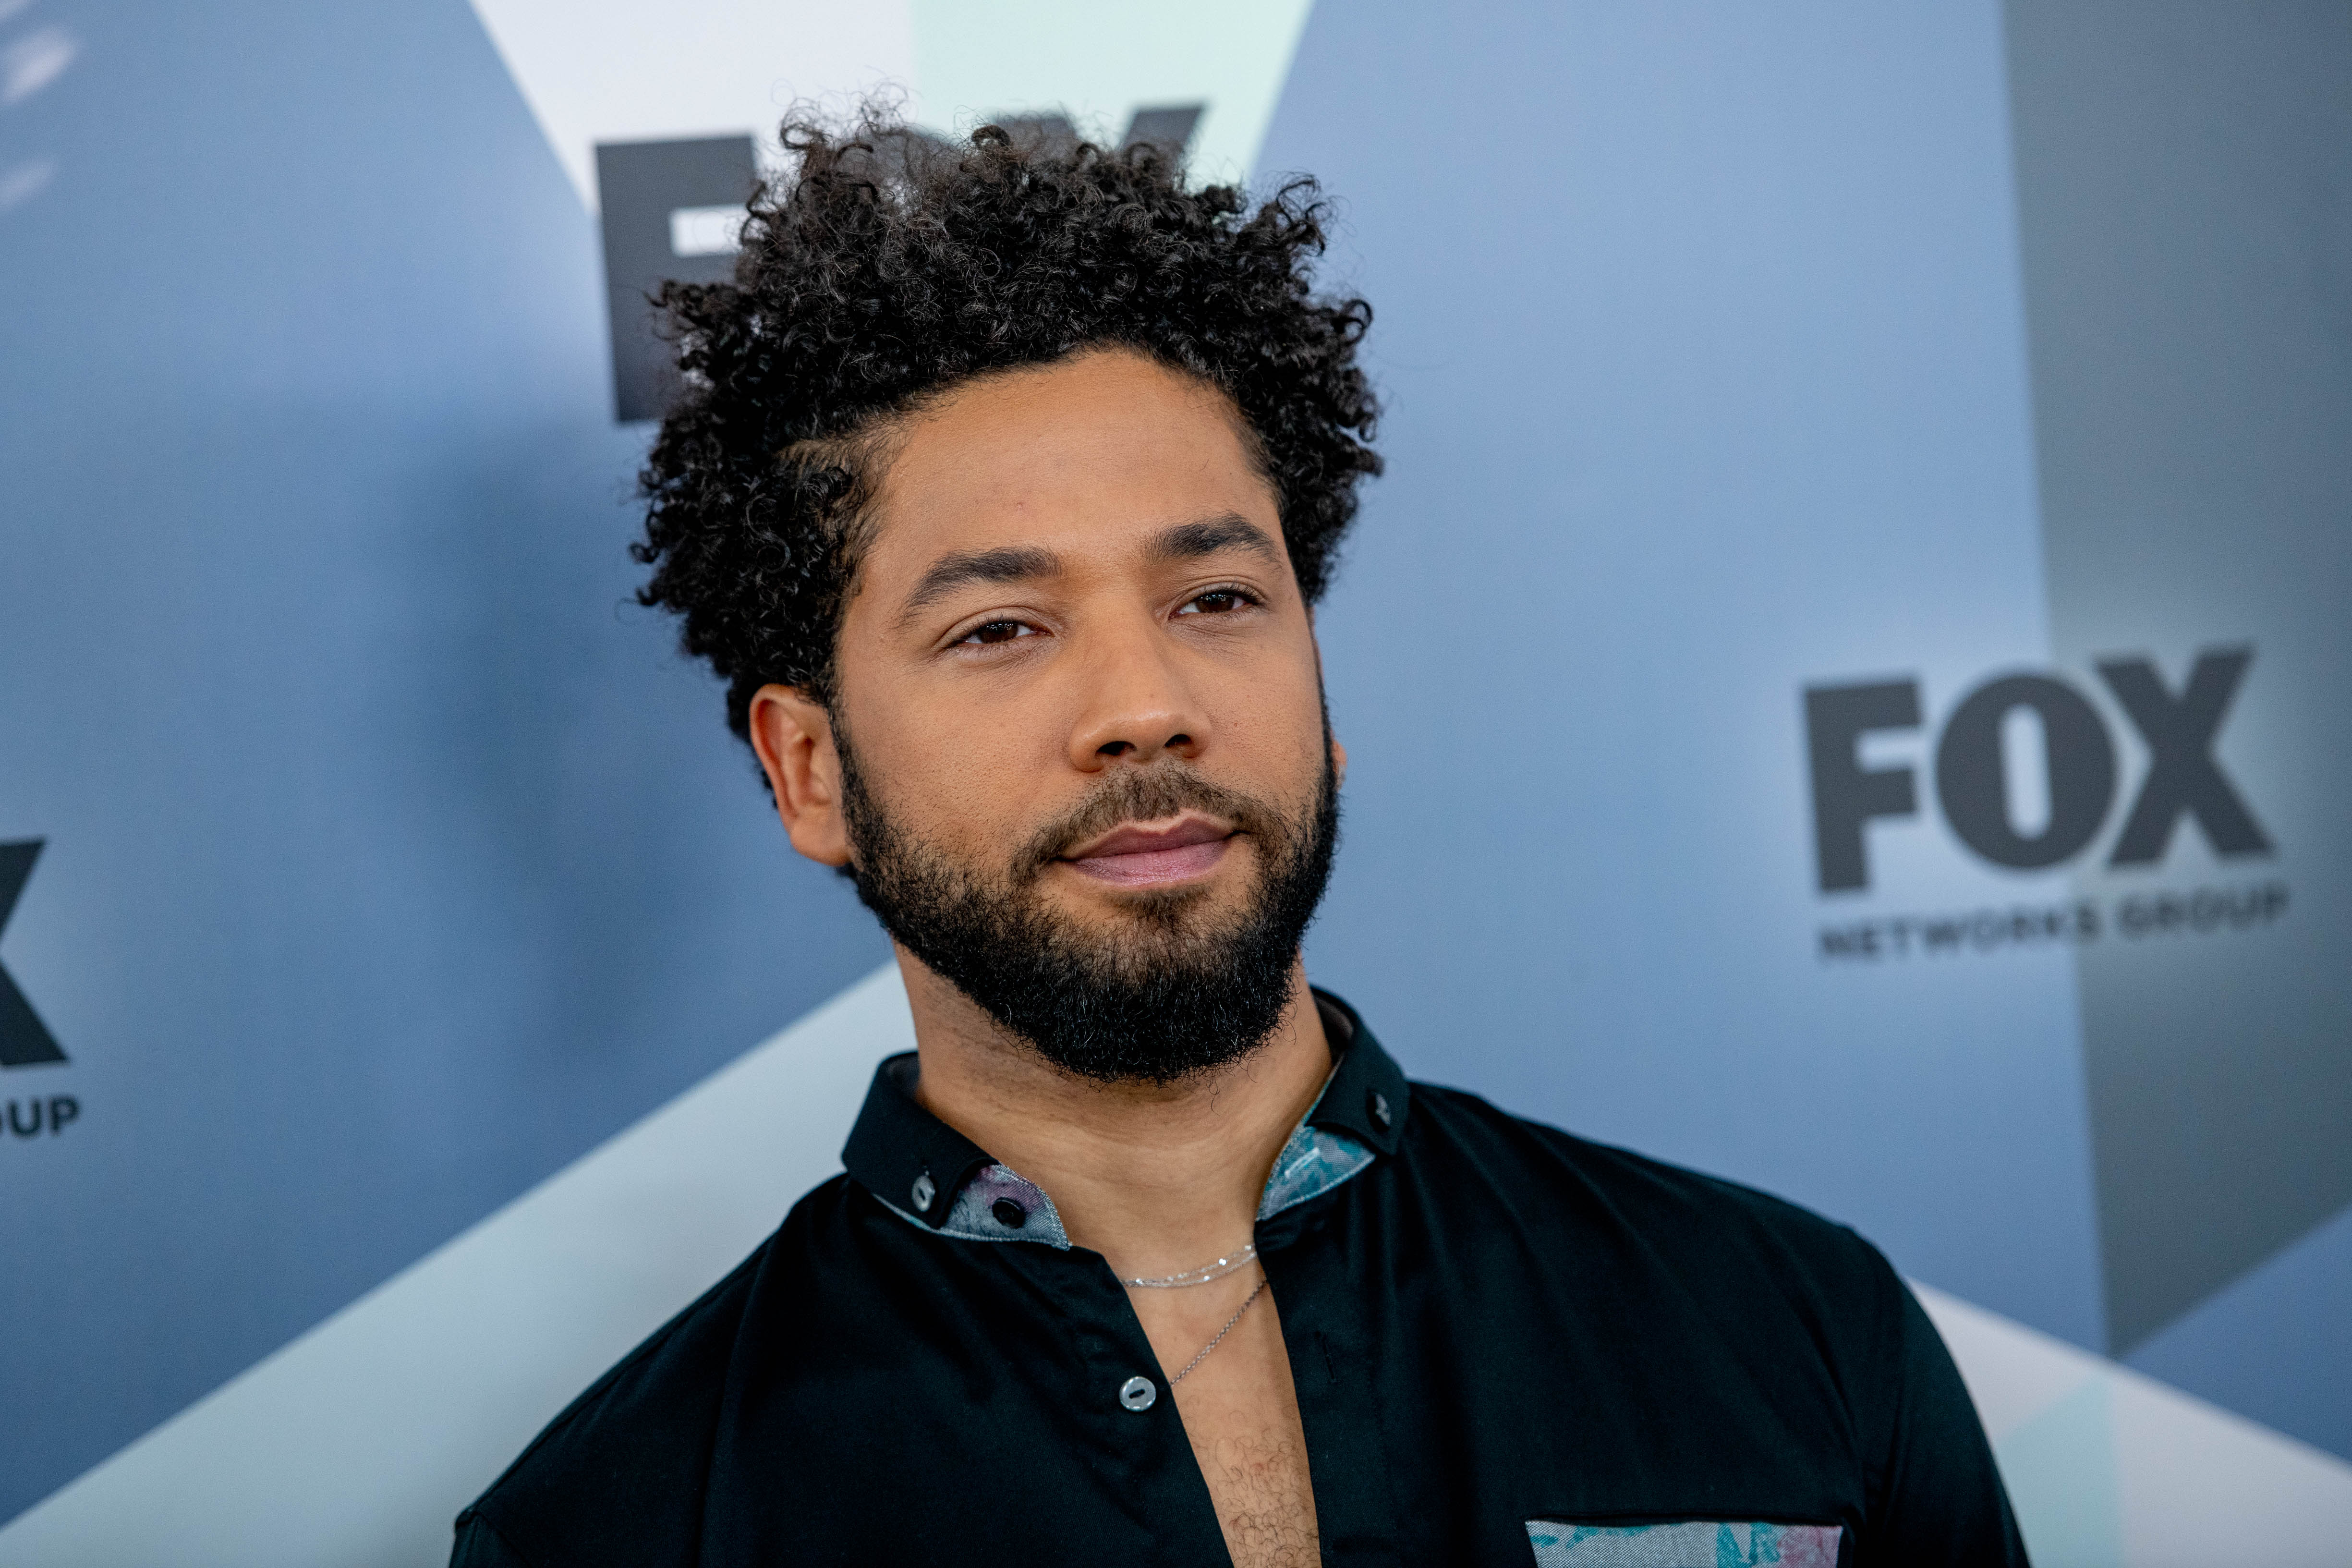 Jussie Smollett attends the 2018 Fox Network Upfront. May, 2018. | Photo: GettyImages/Global Images of Ukraine